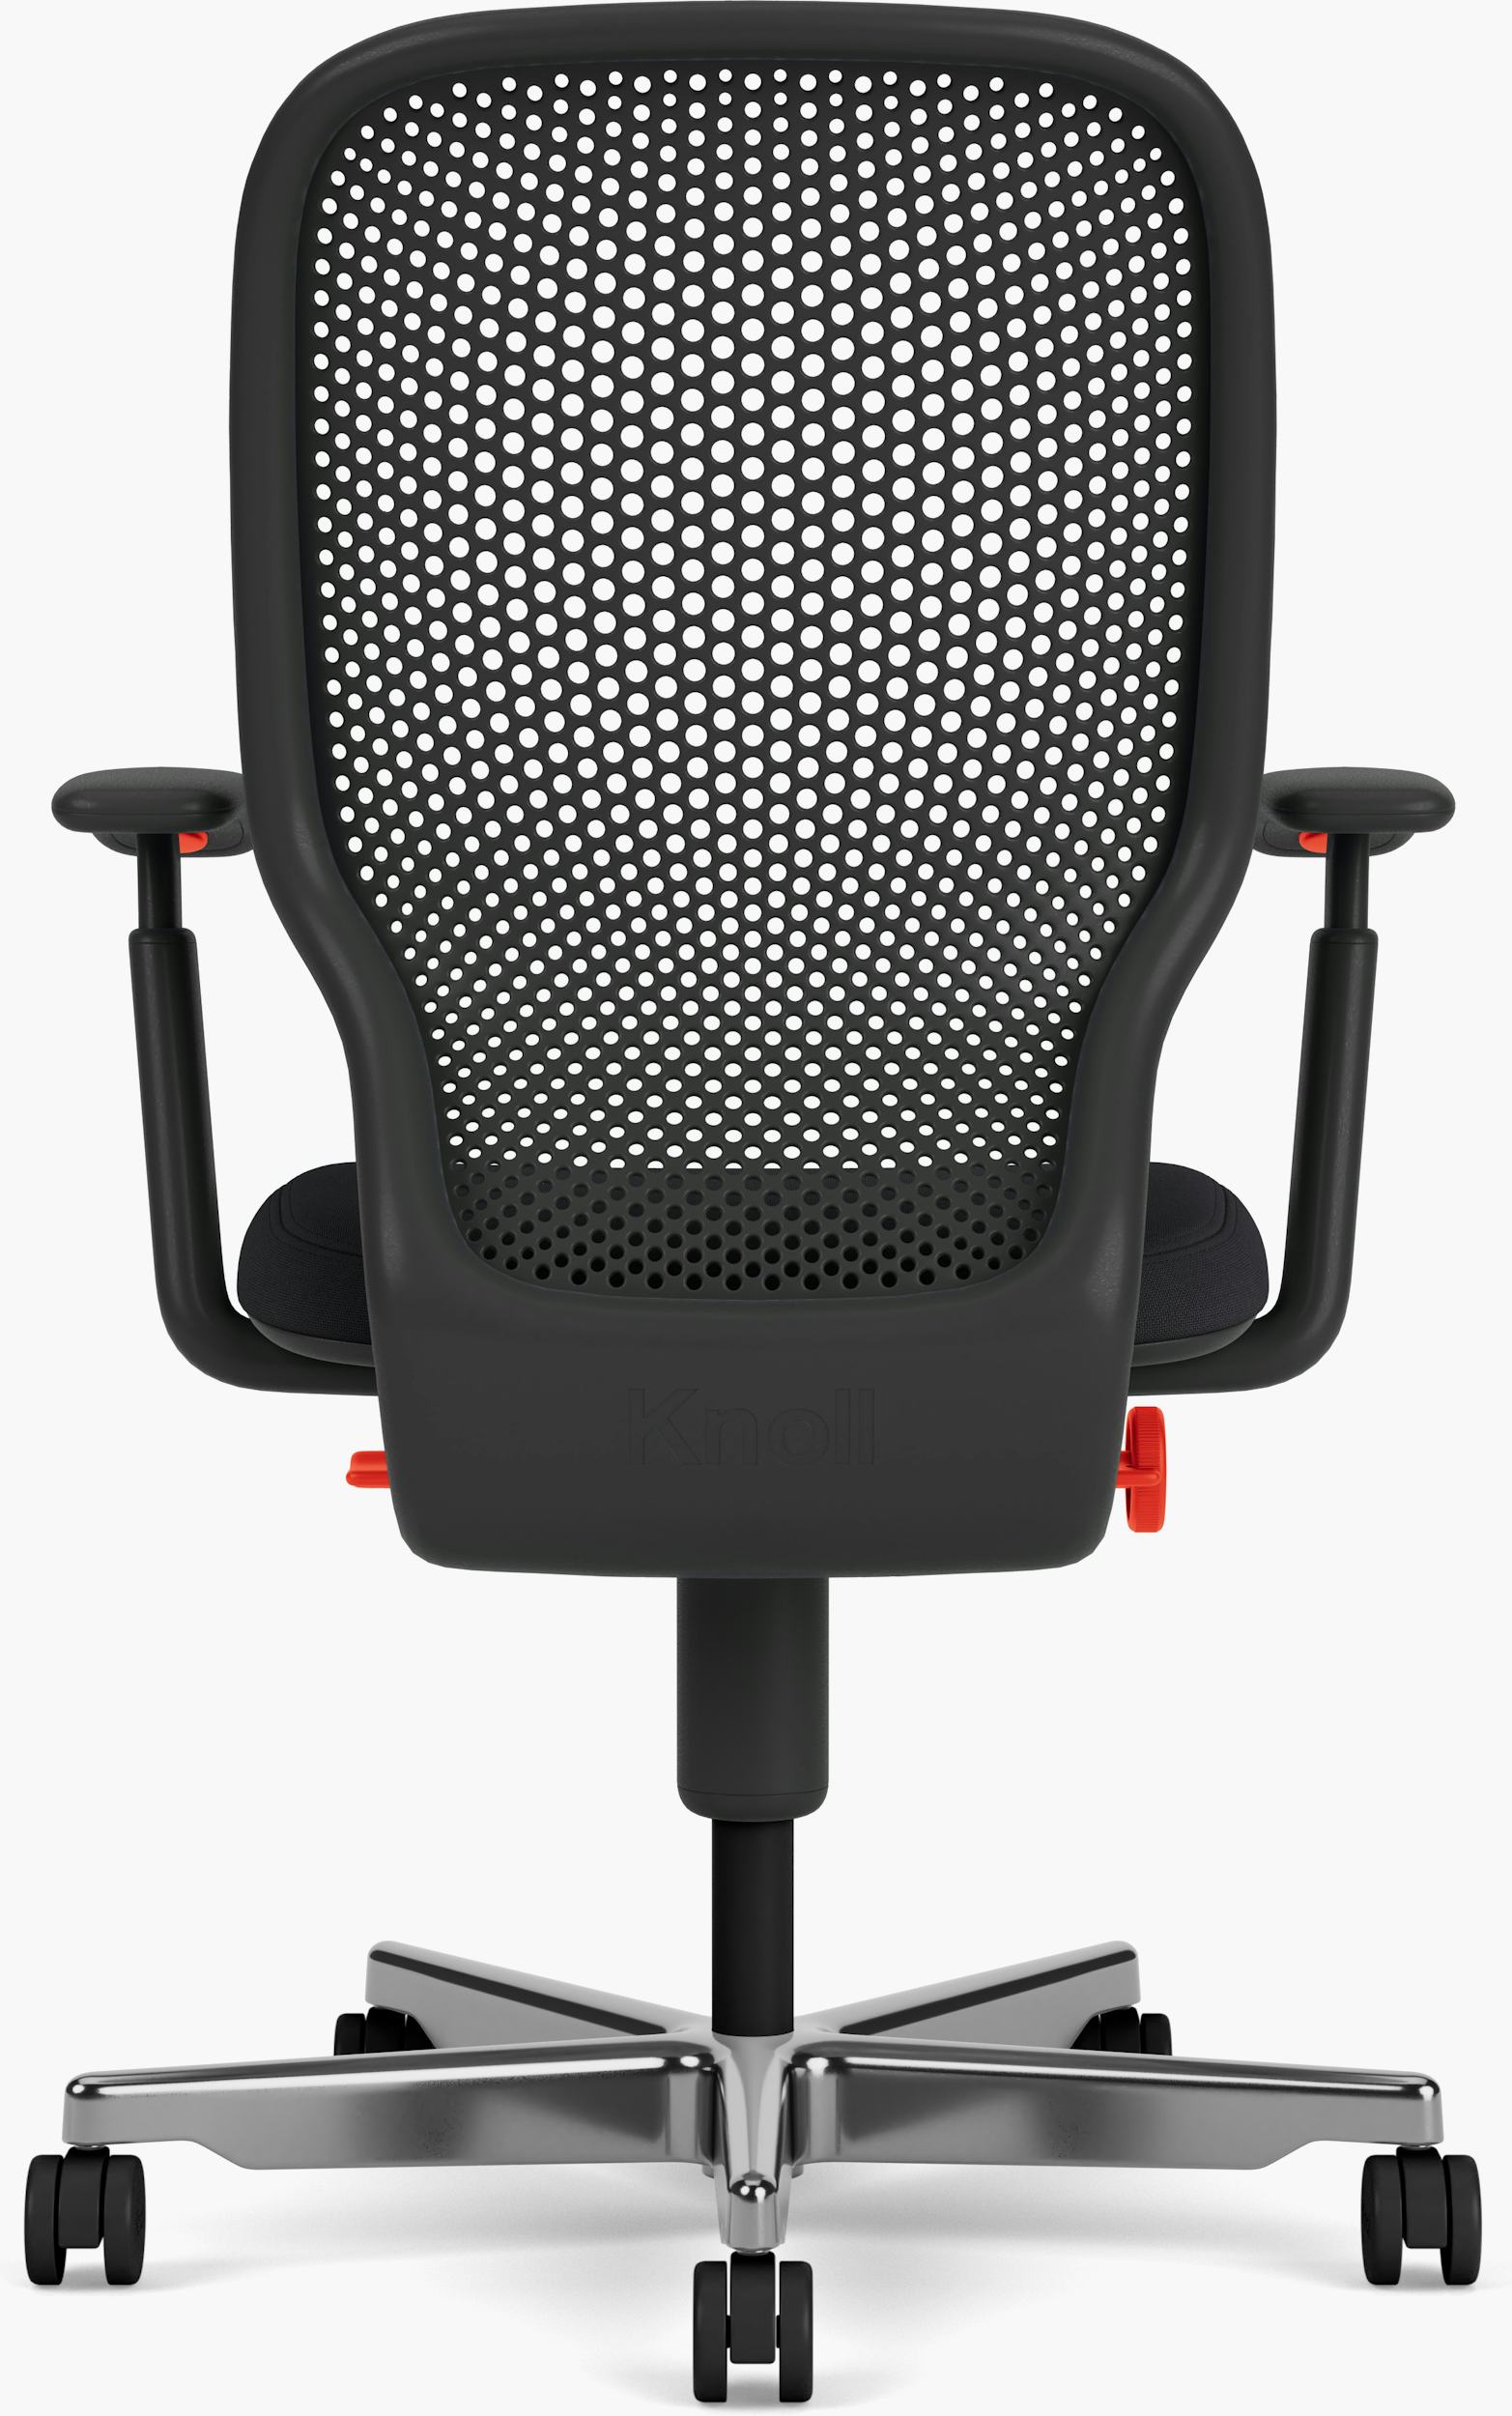 Back Support Office Chair - Pivot by Performance